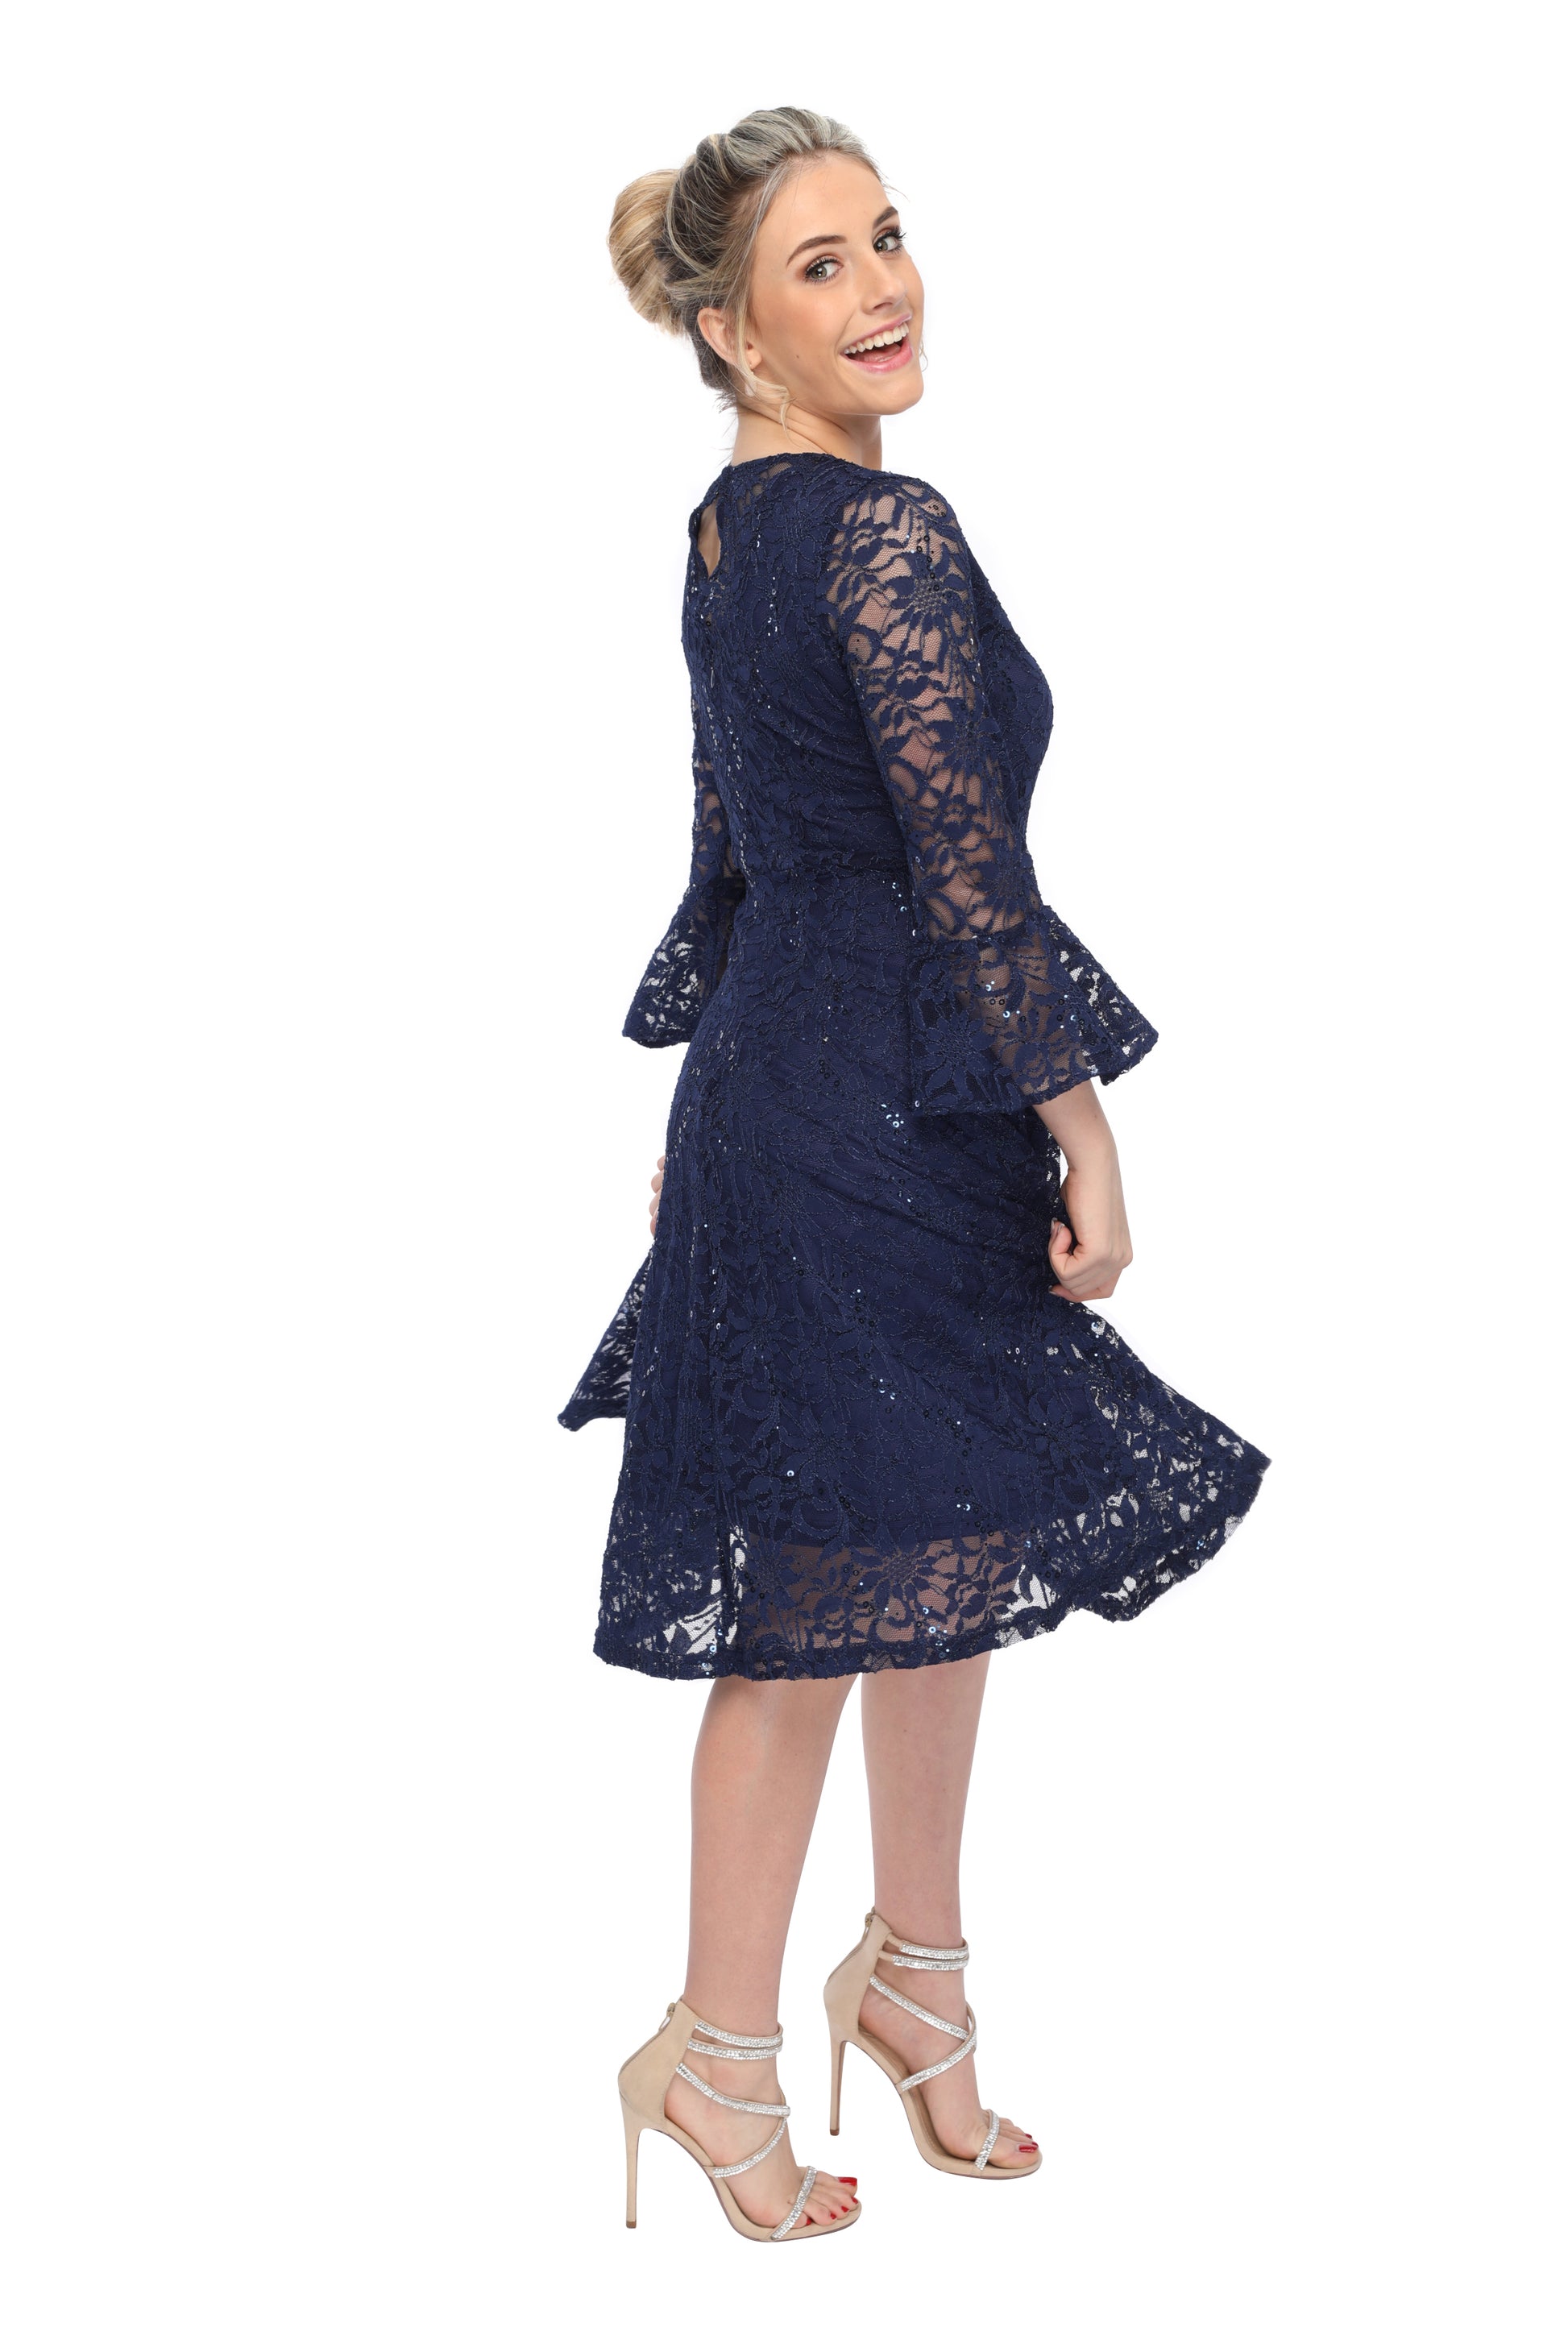 Order Women's Sequin Fit and Flare Party Lace Dress